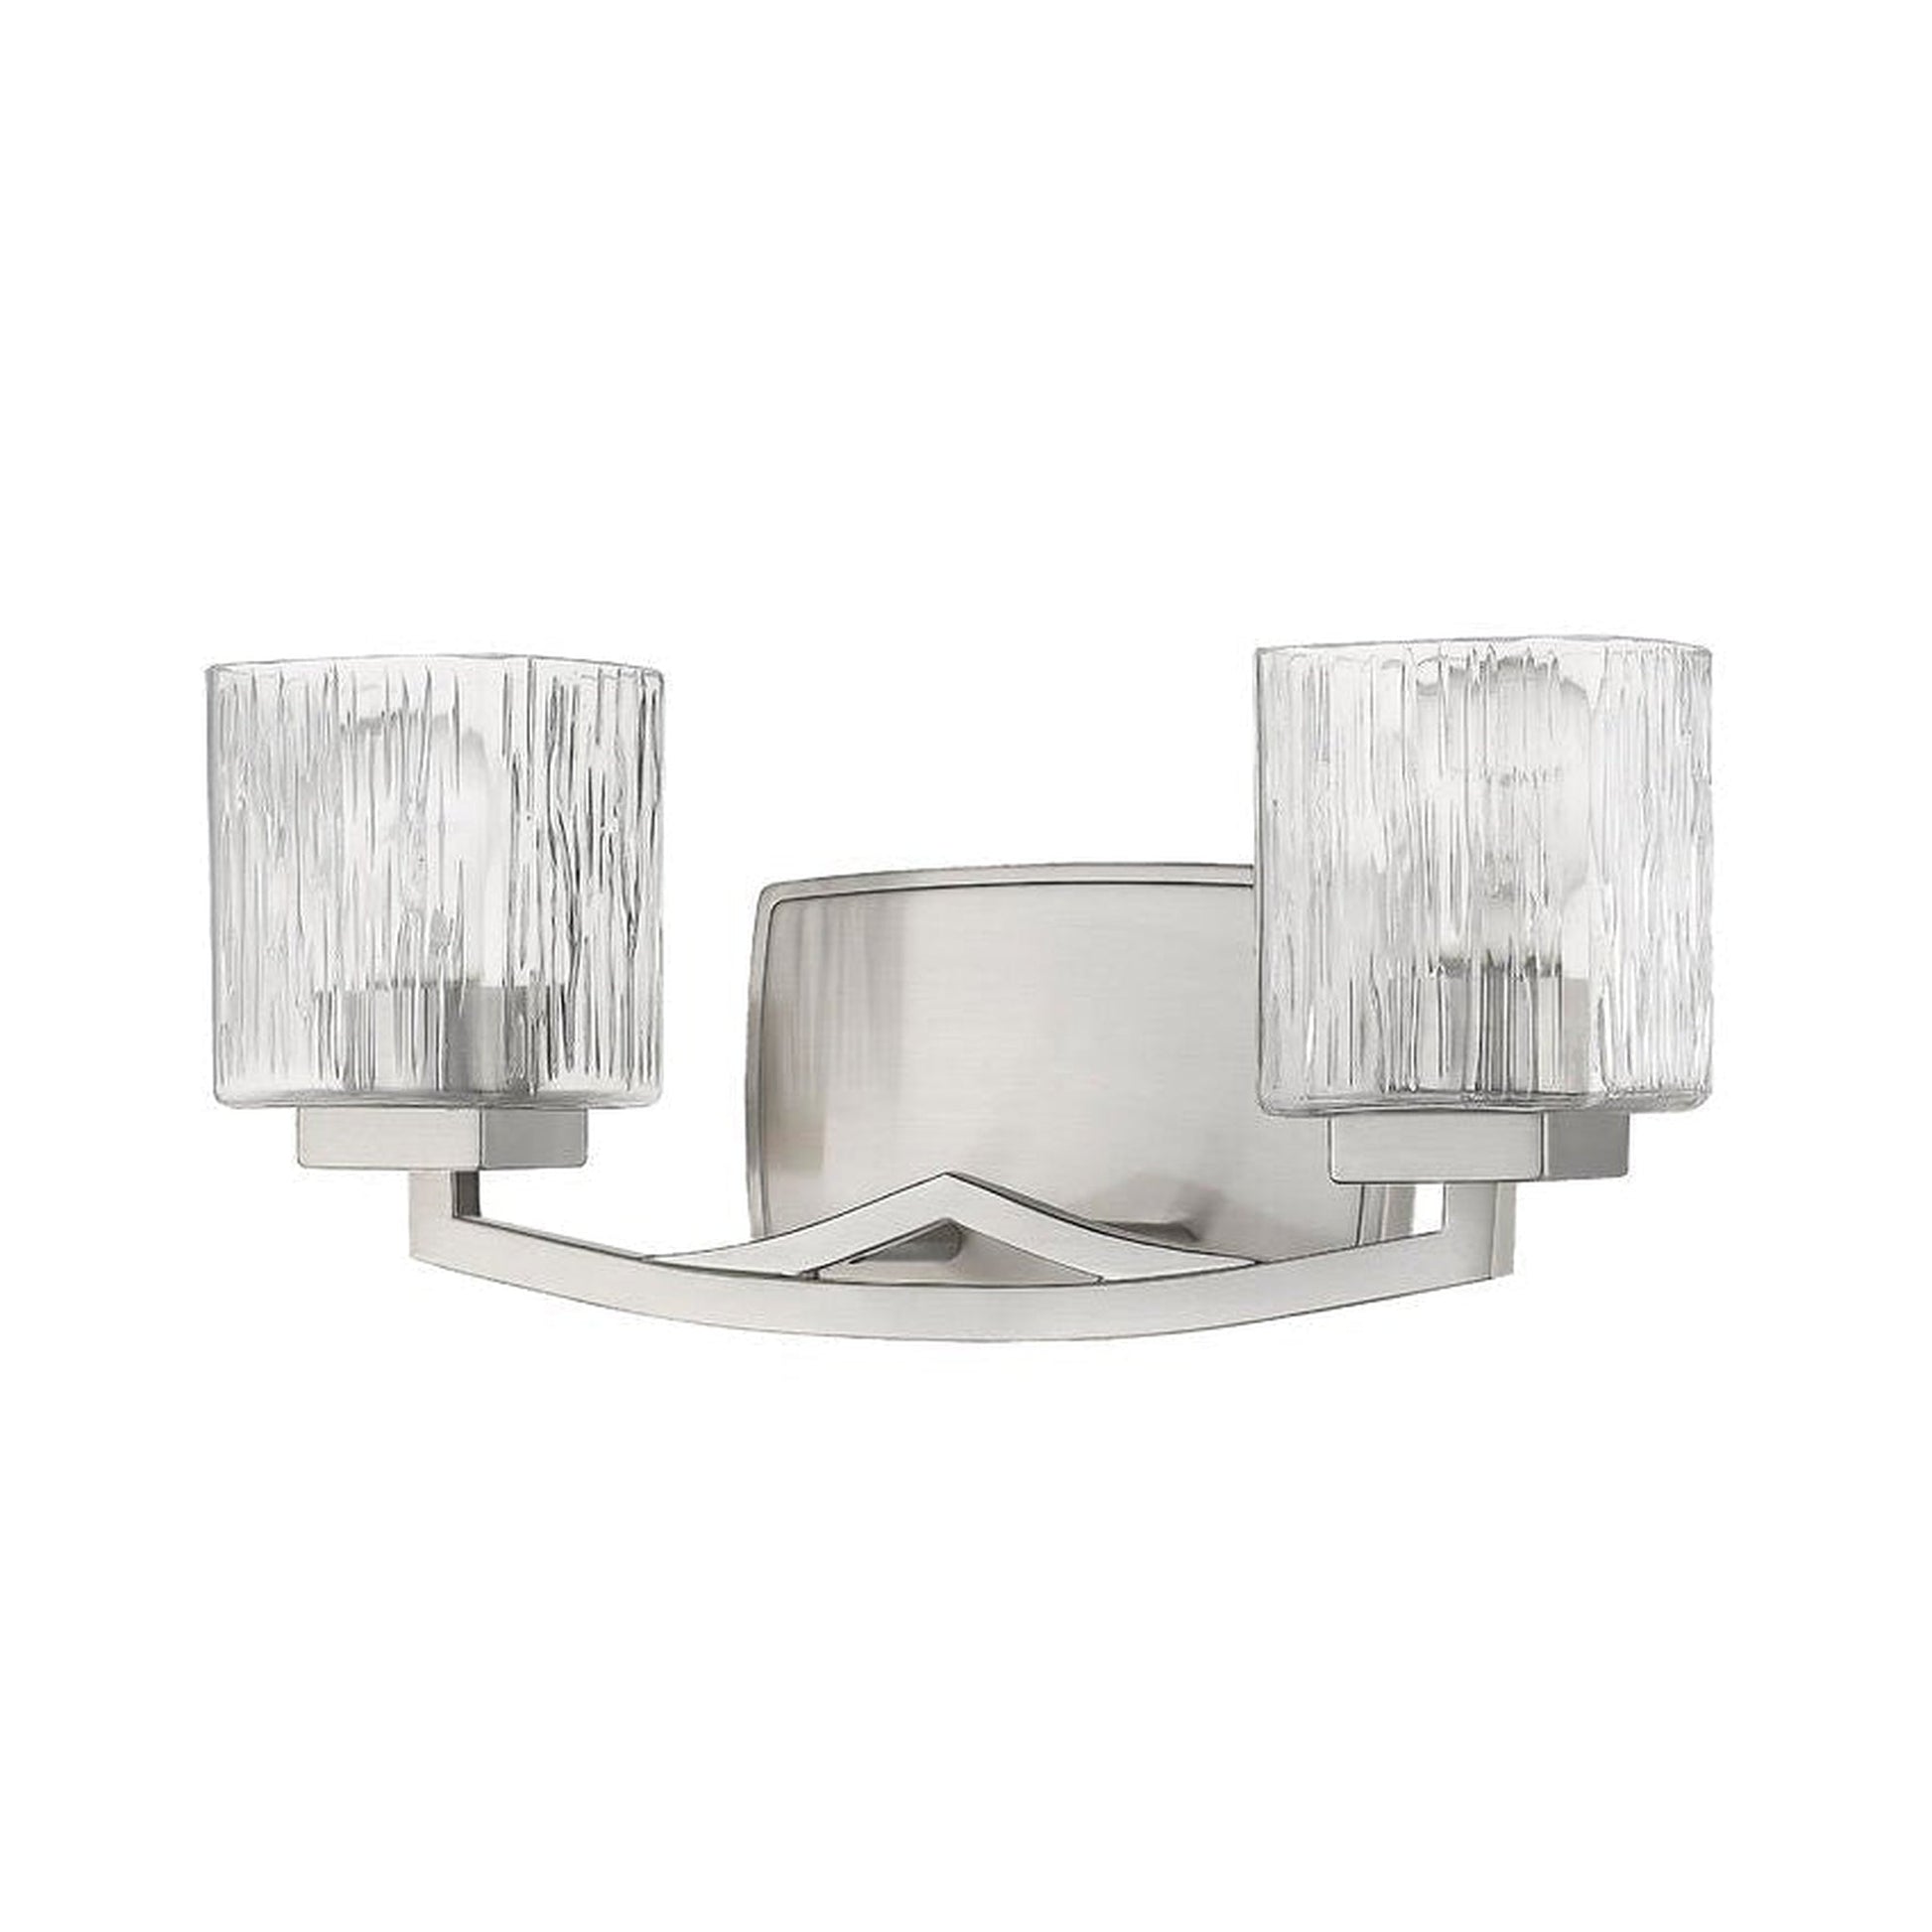 Z-Lite Zaid 16" 2-Light Brushed Nickel Vanity Light With Chisel Glass Shade